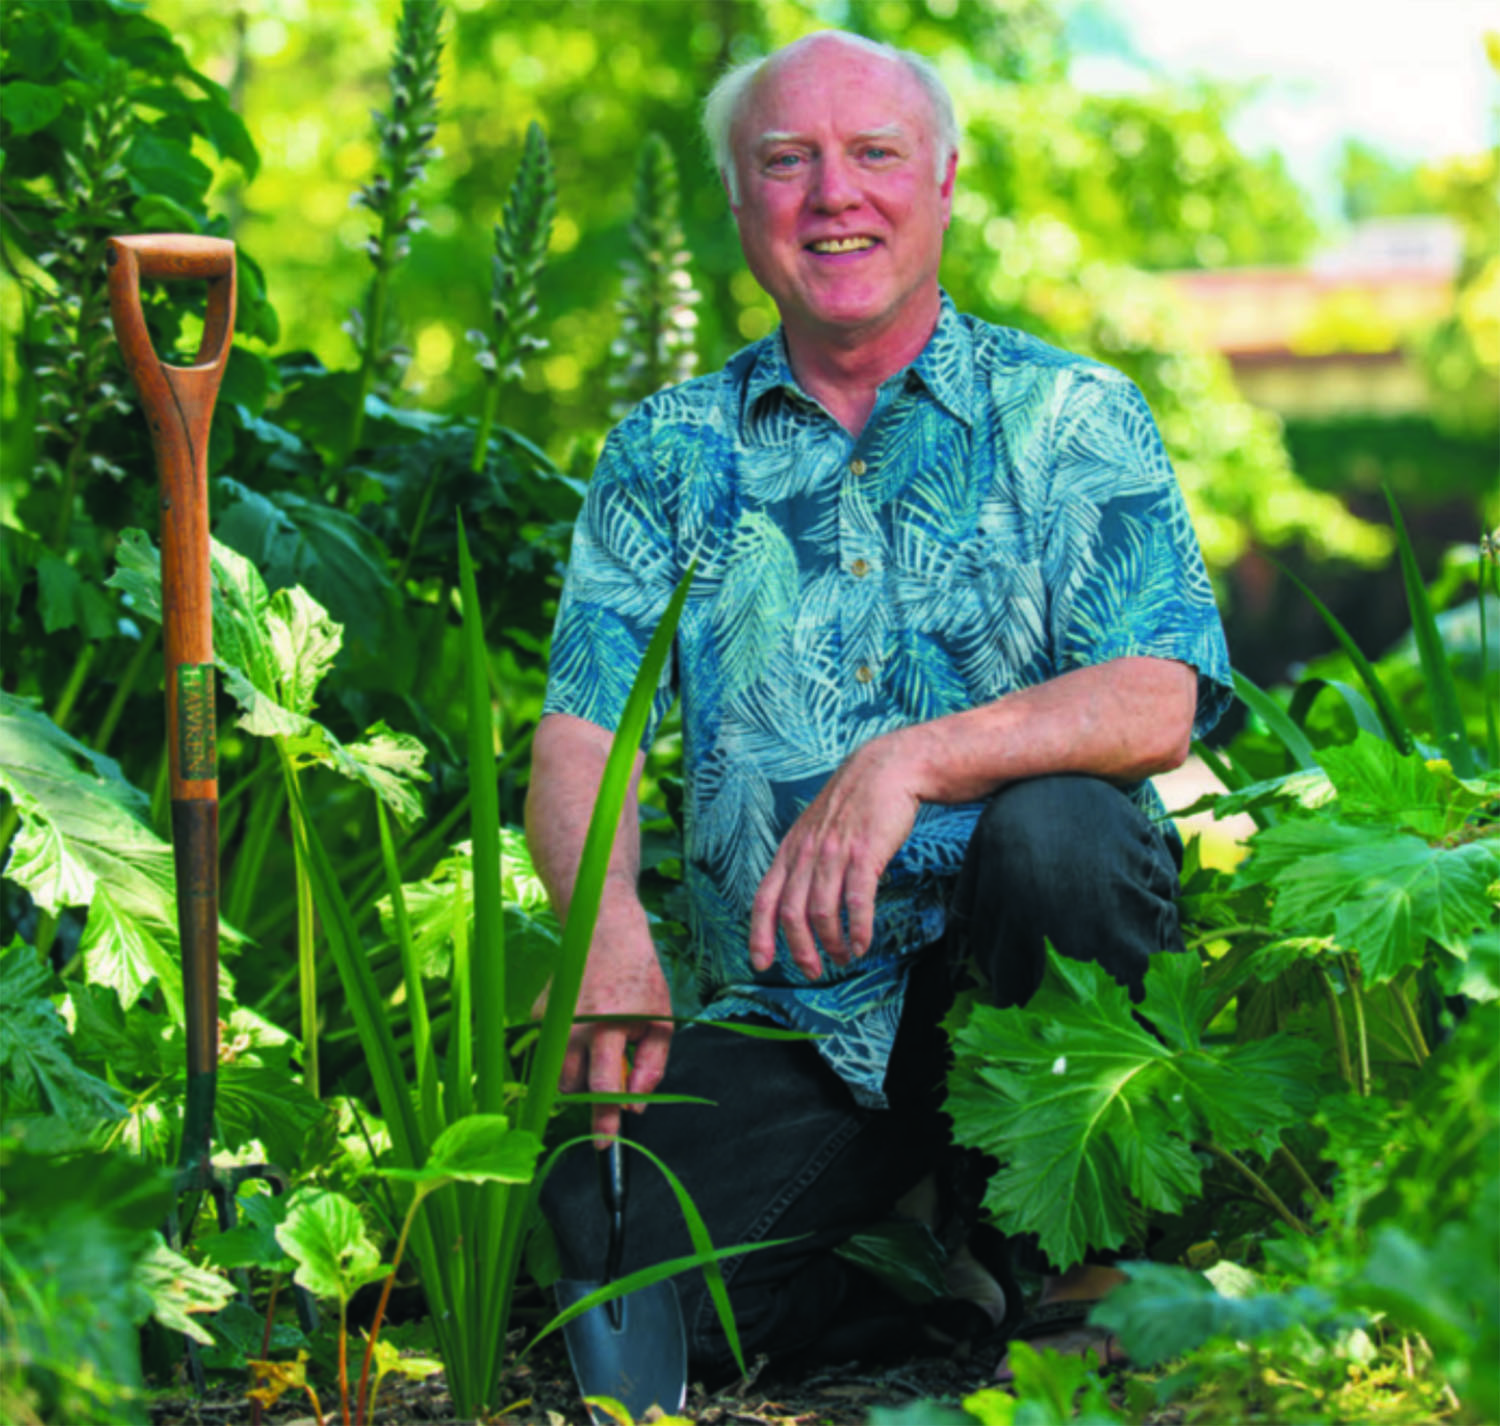 You are currently viewing Podcast: Gardening Myths & Solutions with Robert Kourik